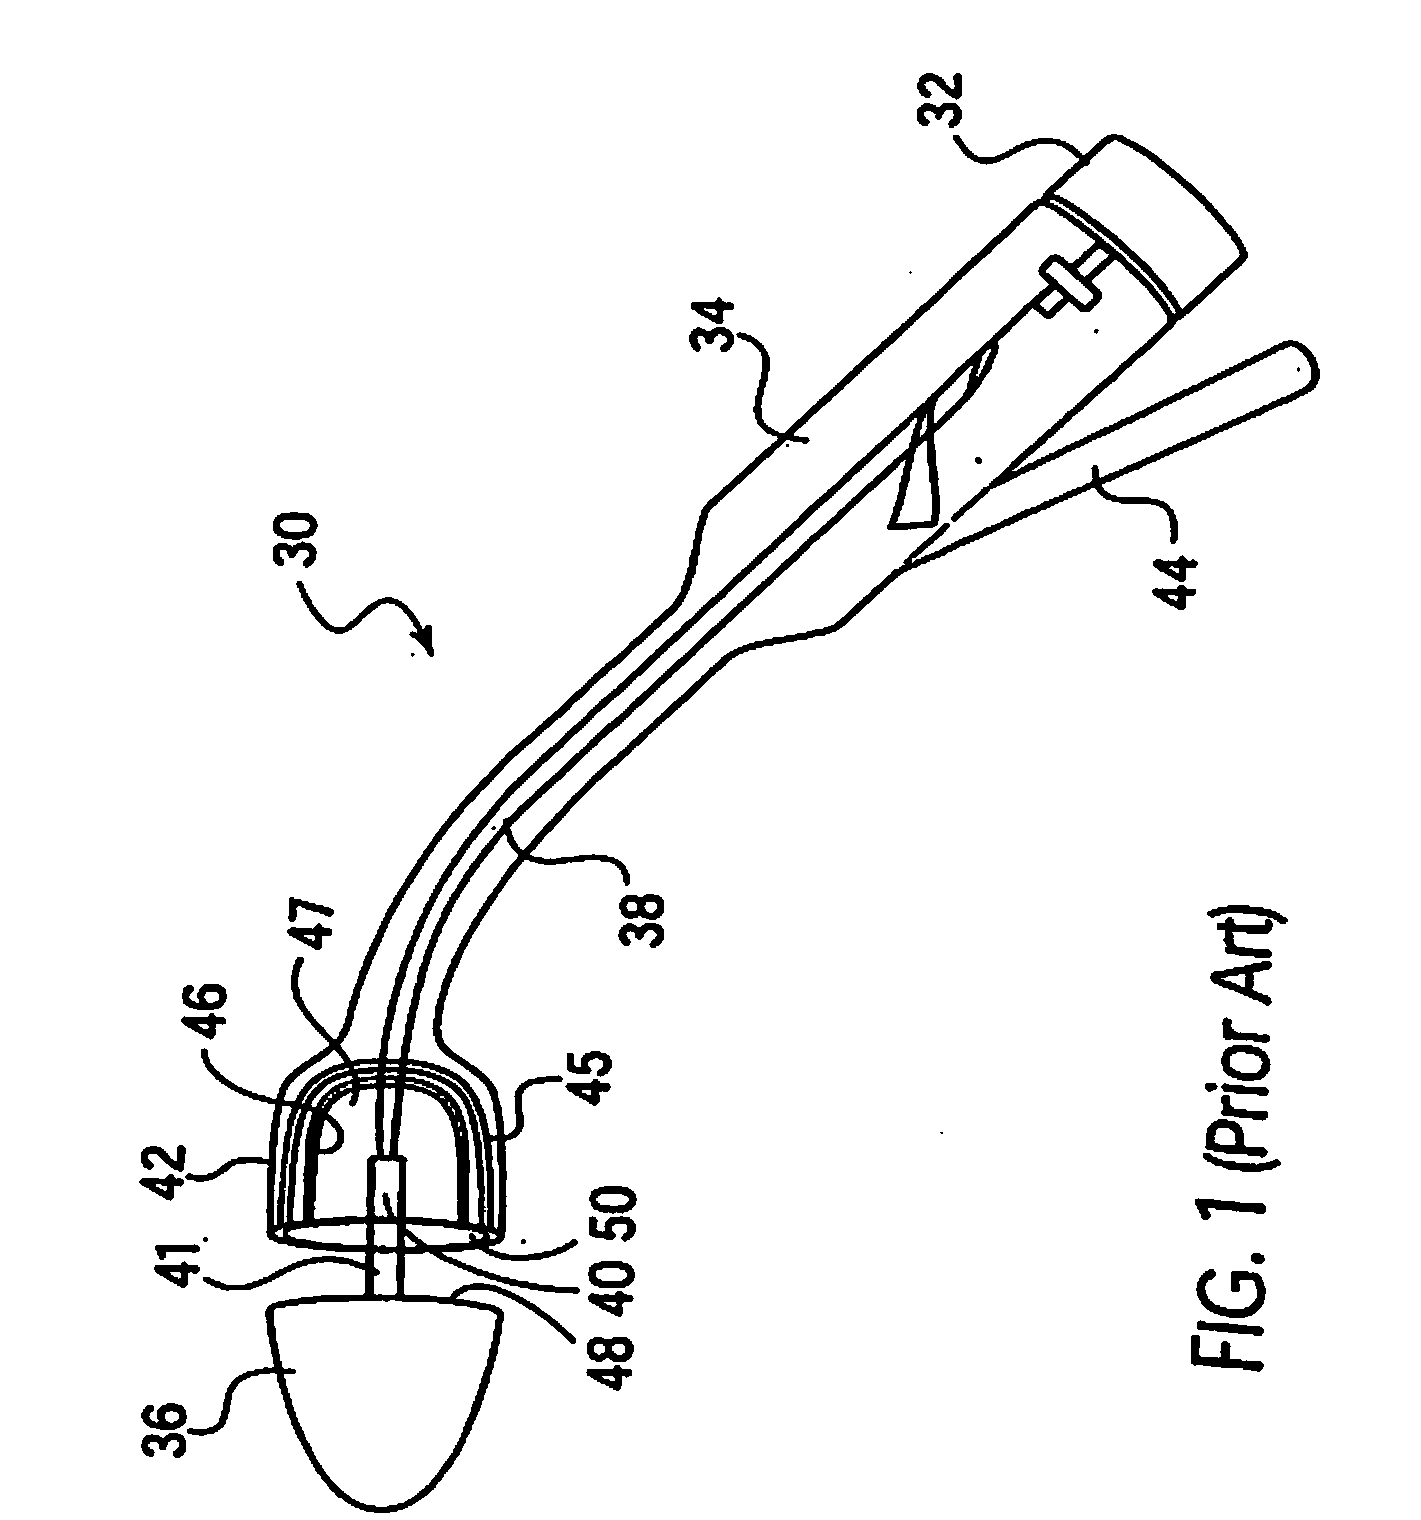 Electromechanical driver and remote surgical instrument attachment having computer assisted control capabilities